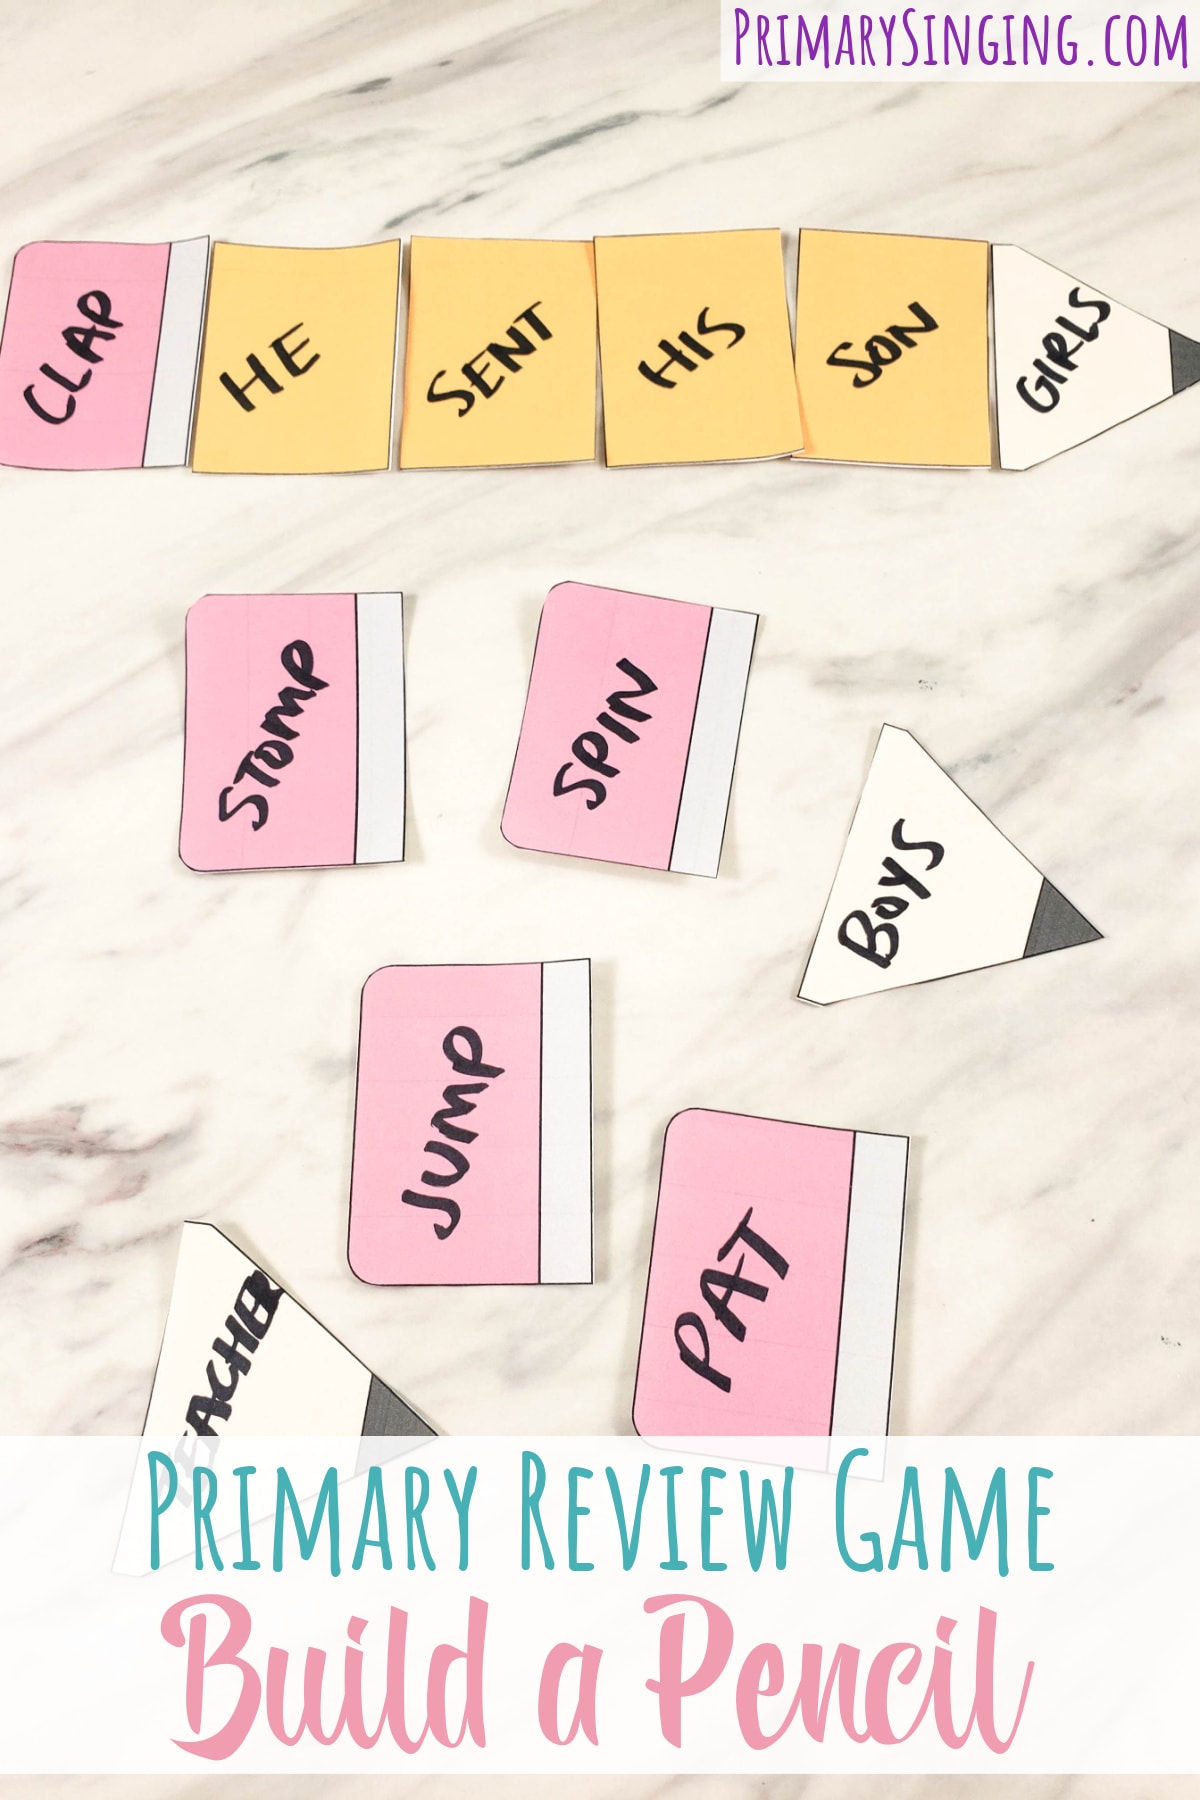 Build a Pencil Primary Song Review Game for Singing Time or Primary Program review